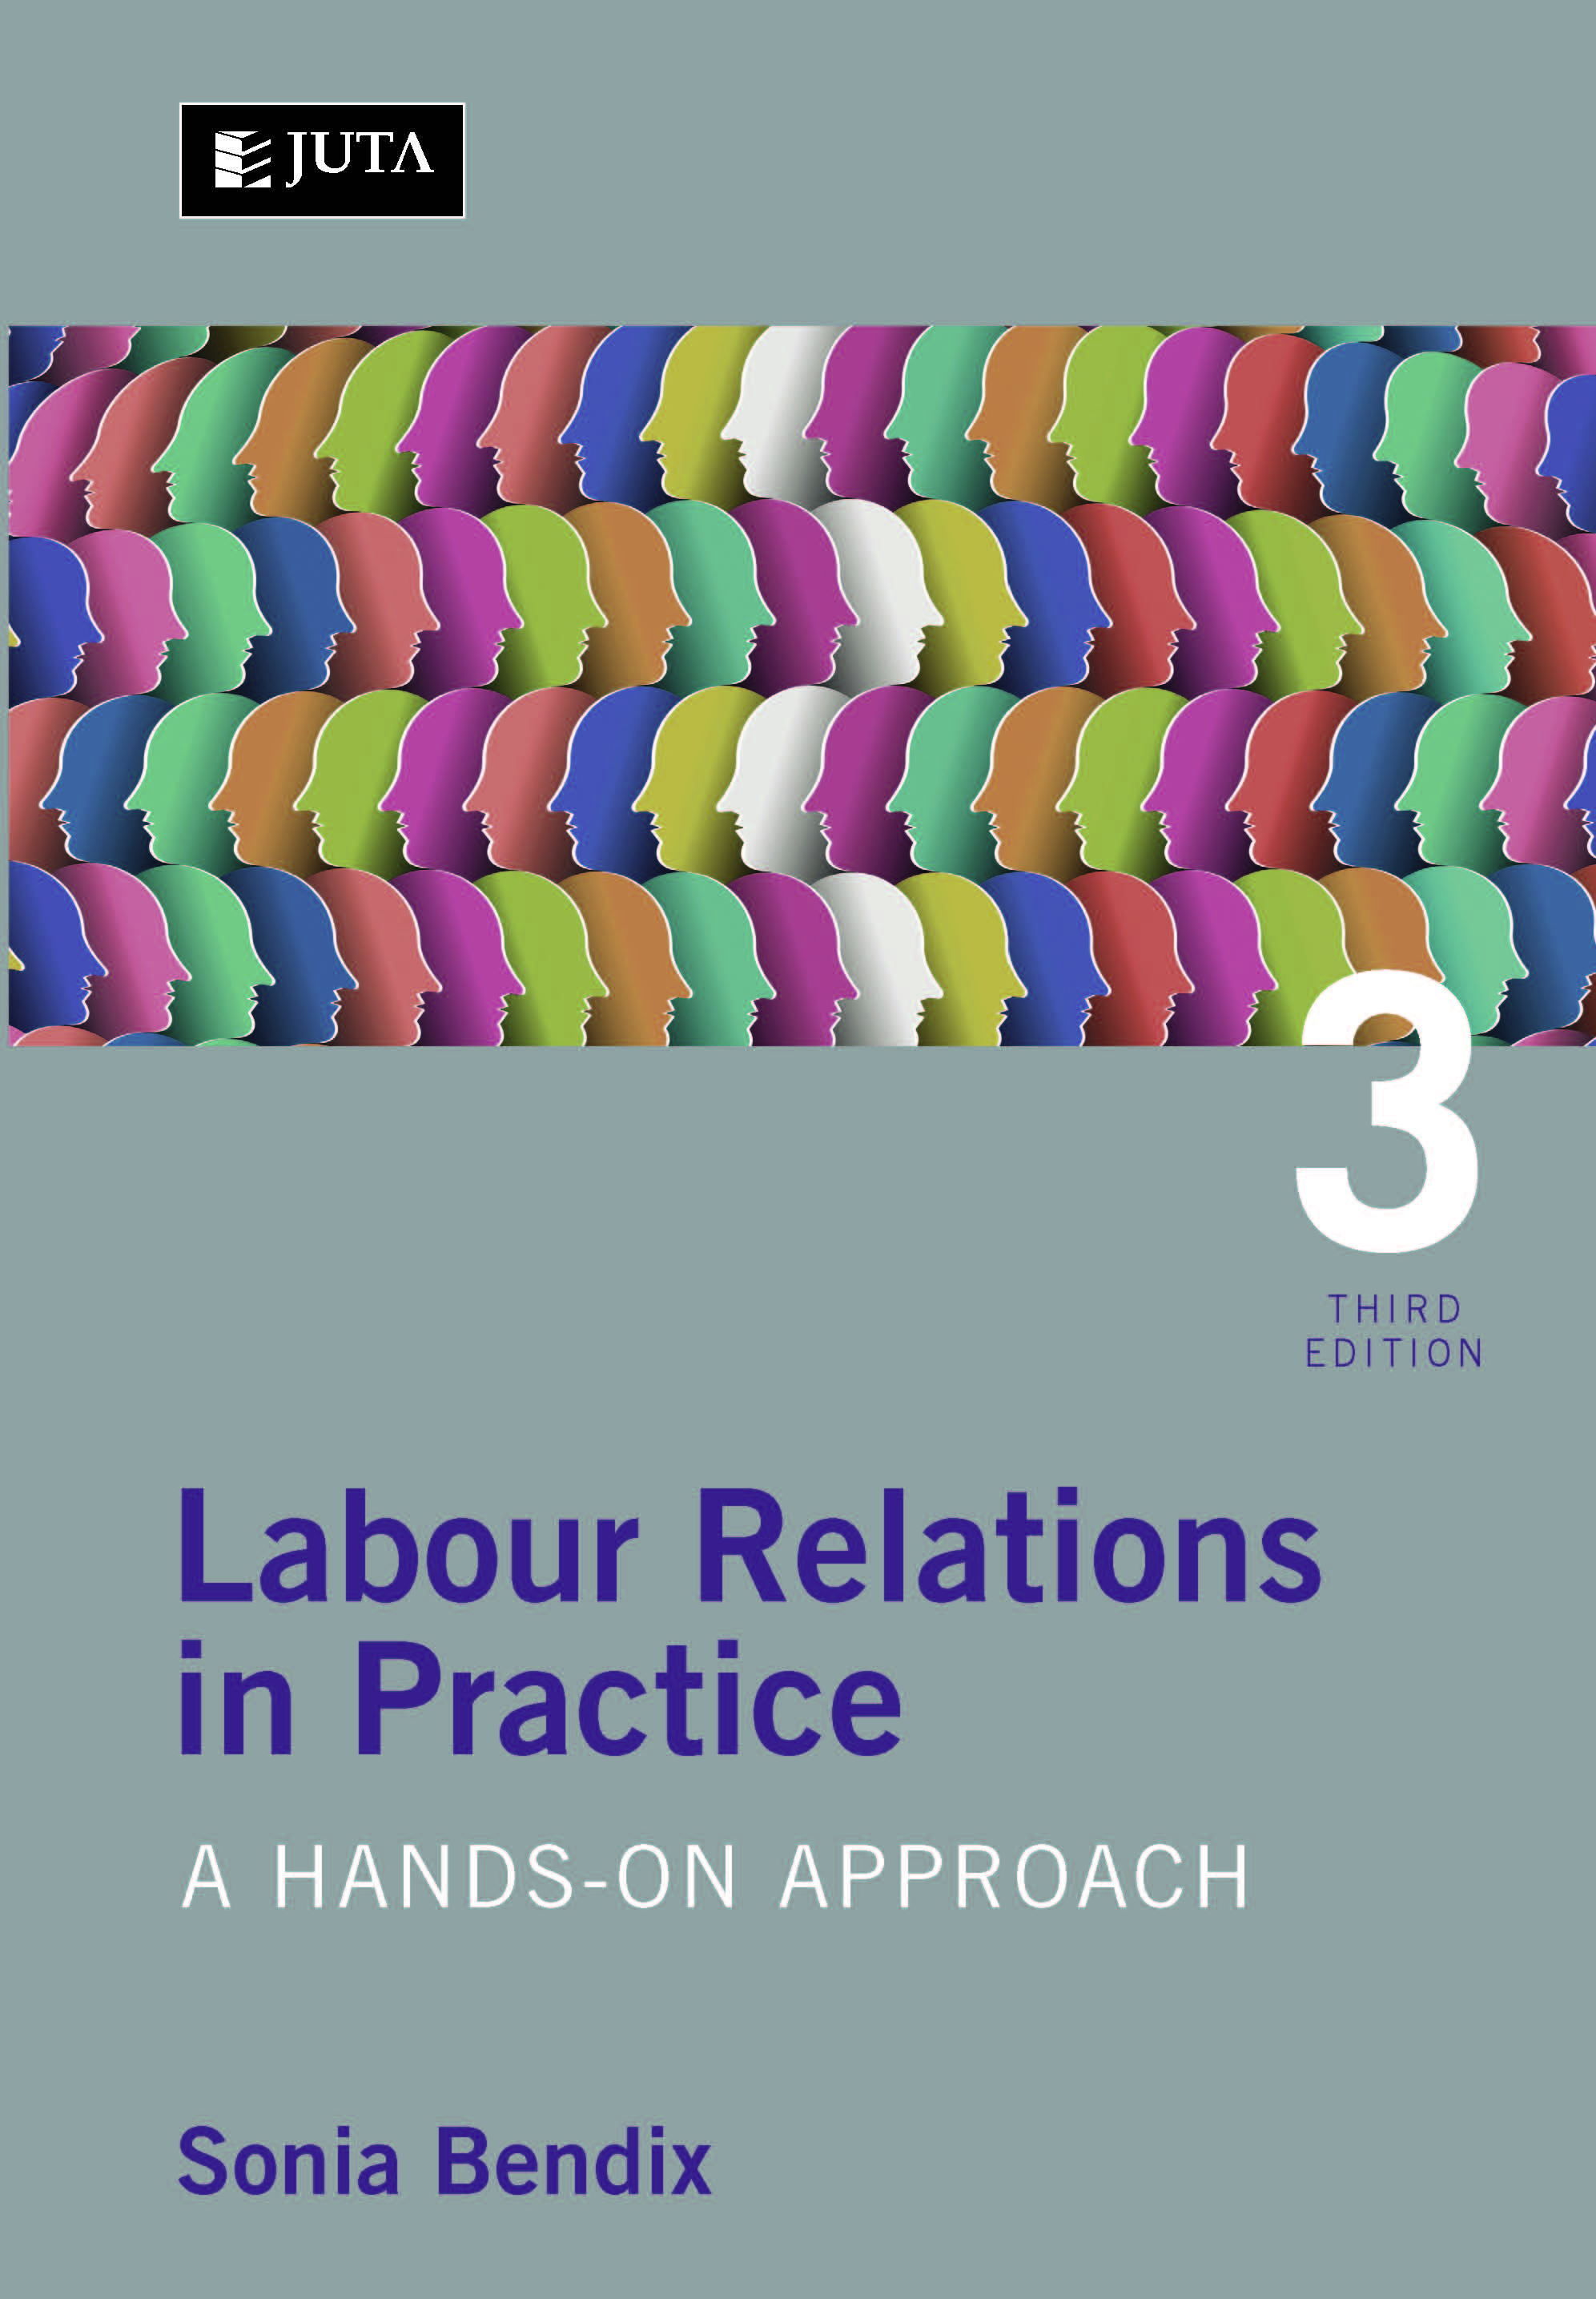 Labour Relations in Practice: A Hands-On Approach